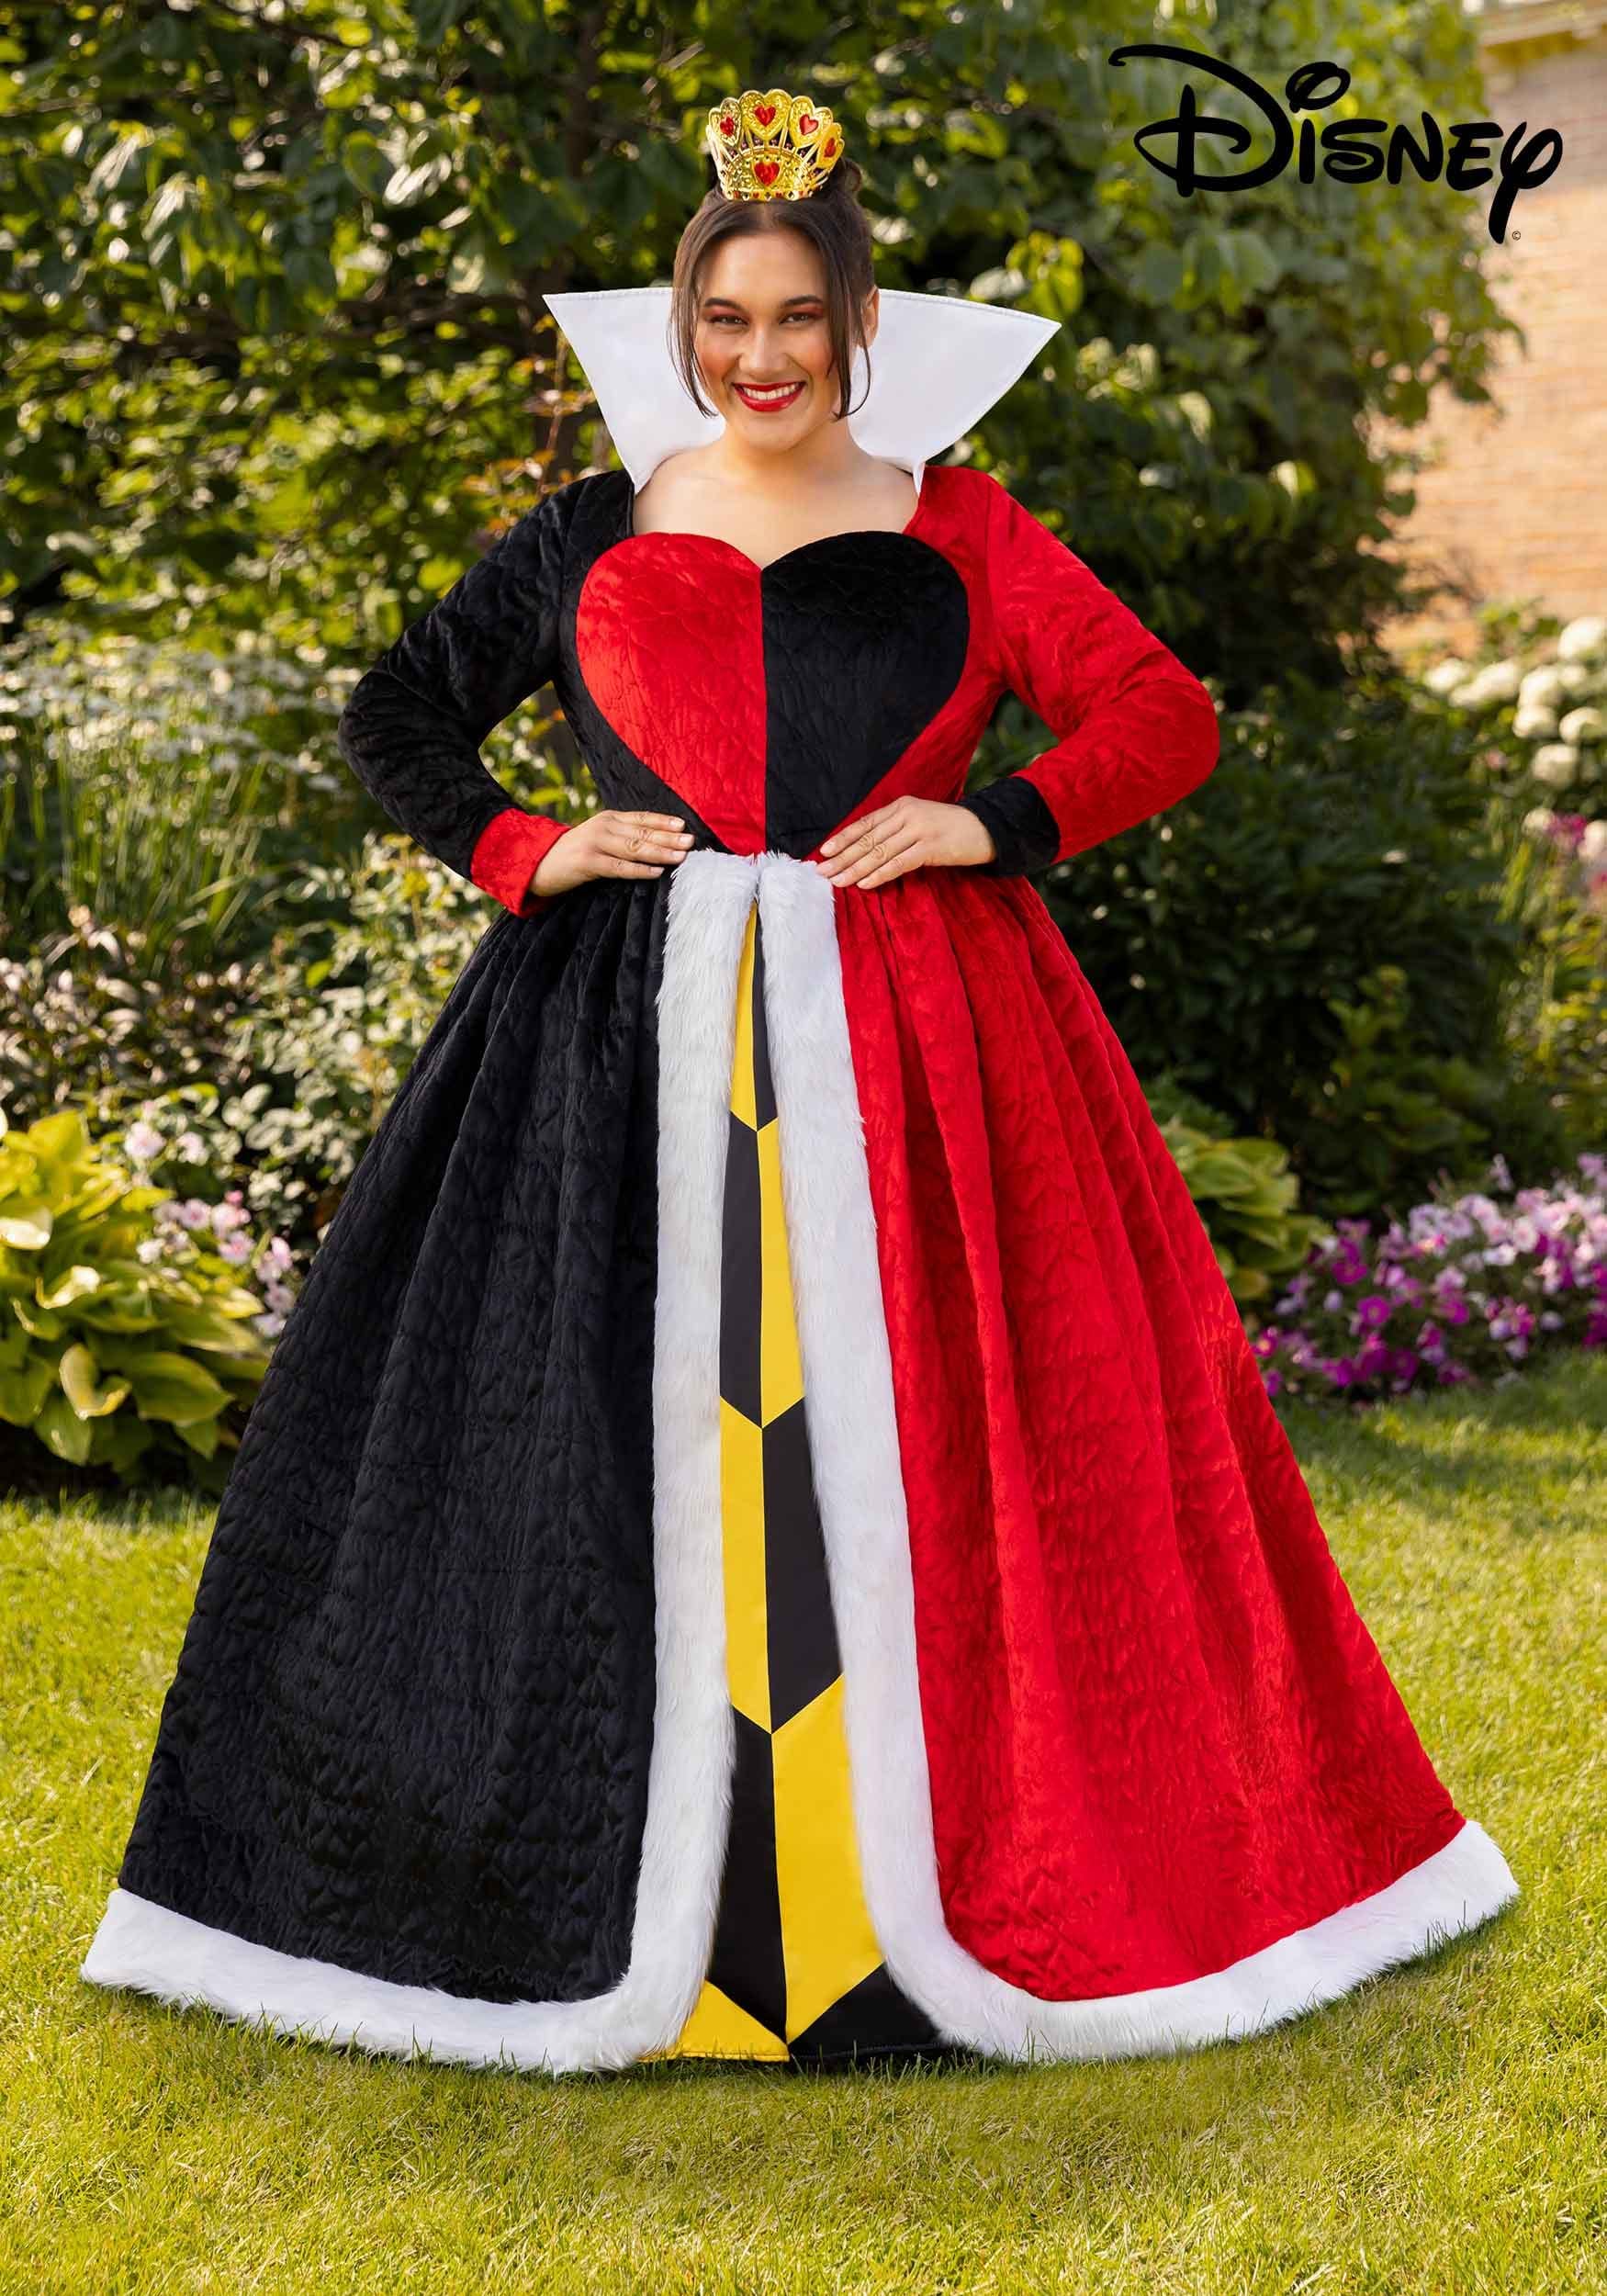 https://images.halloweencostumes.ca/products/86110/1-1/plus-size-authentic-disney-queen-of-hearts-costume.jpg